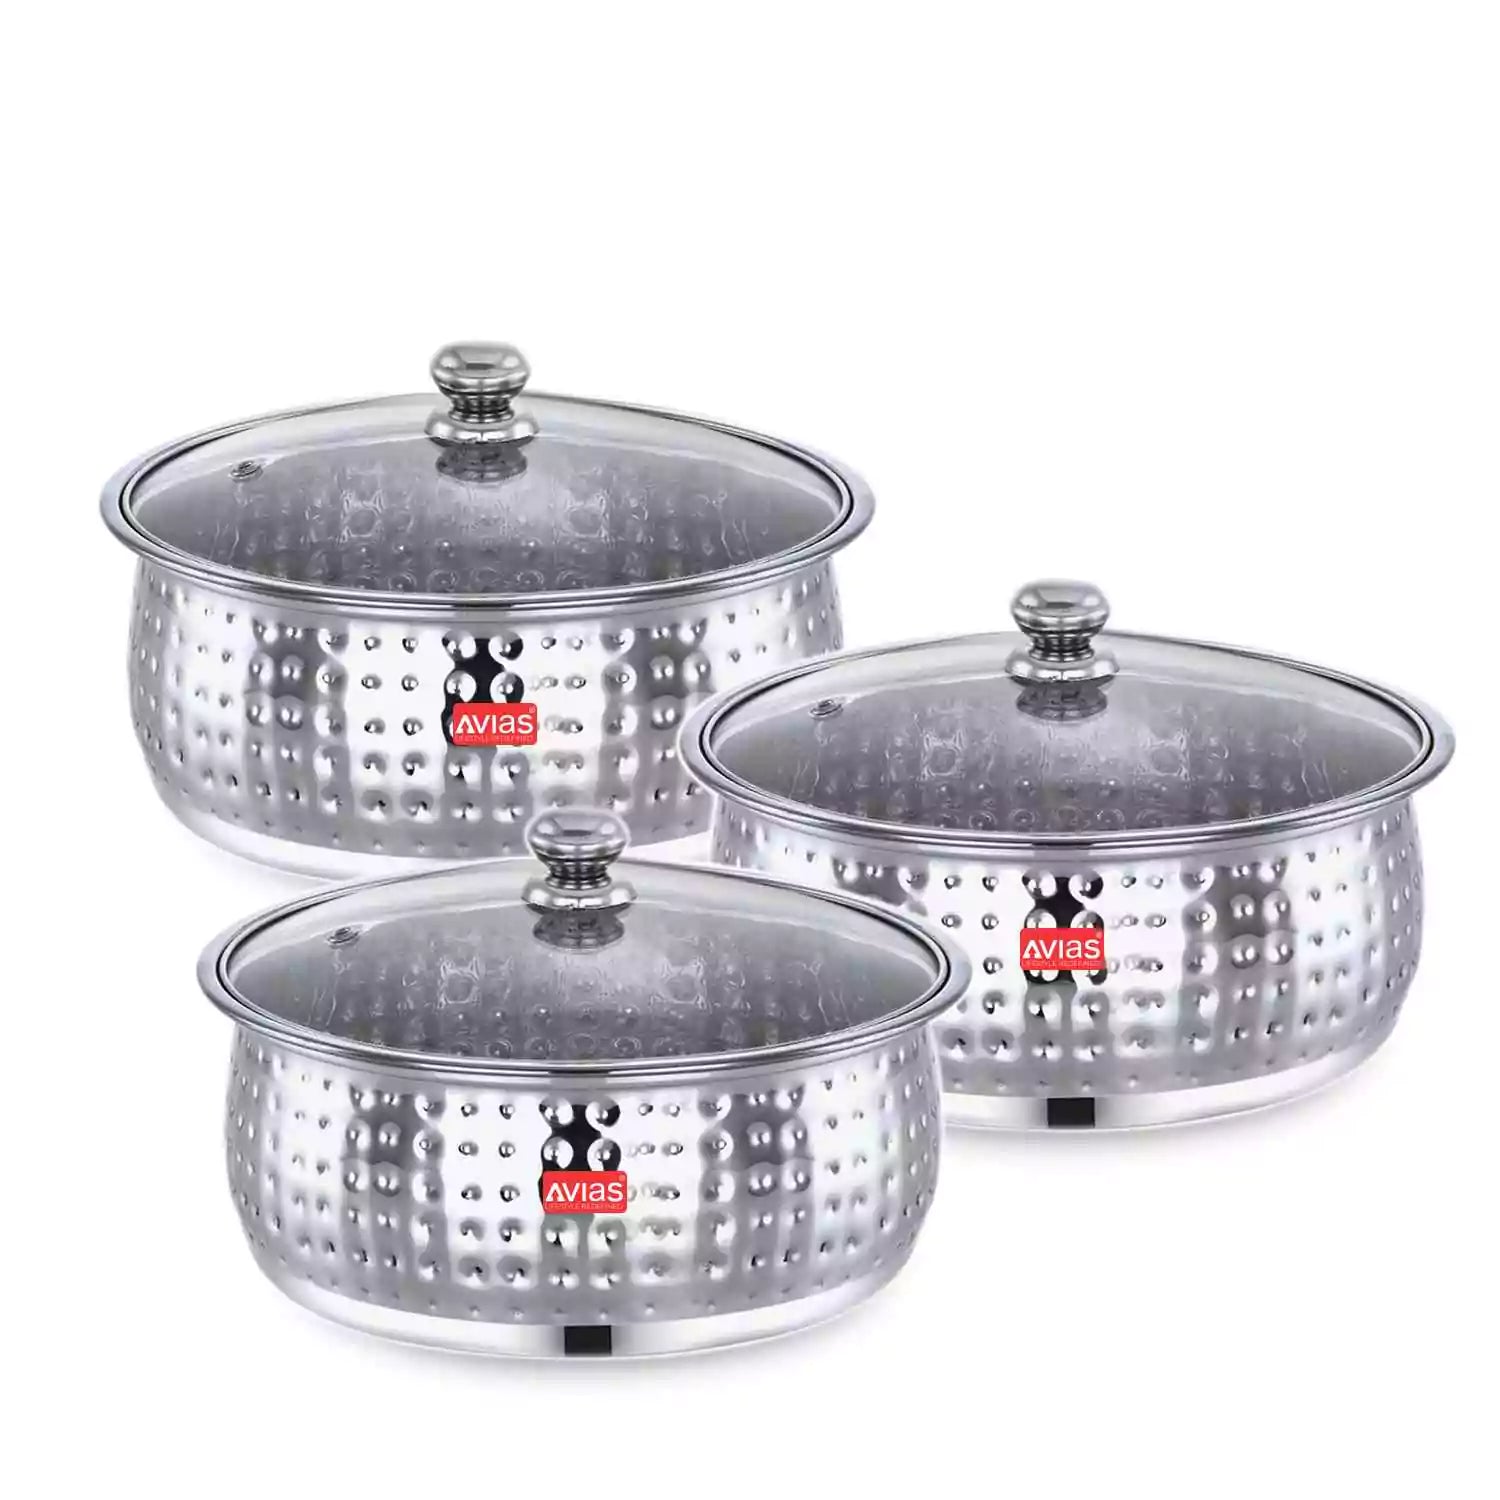 Avias Indus Stainless steel Cookpot 20G Hammered Food Server | Set of 3